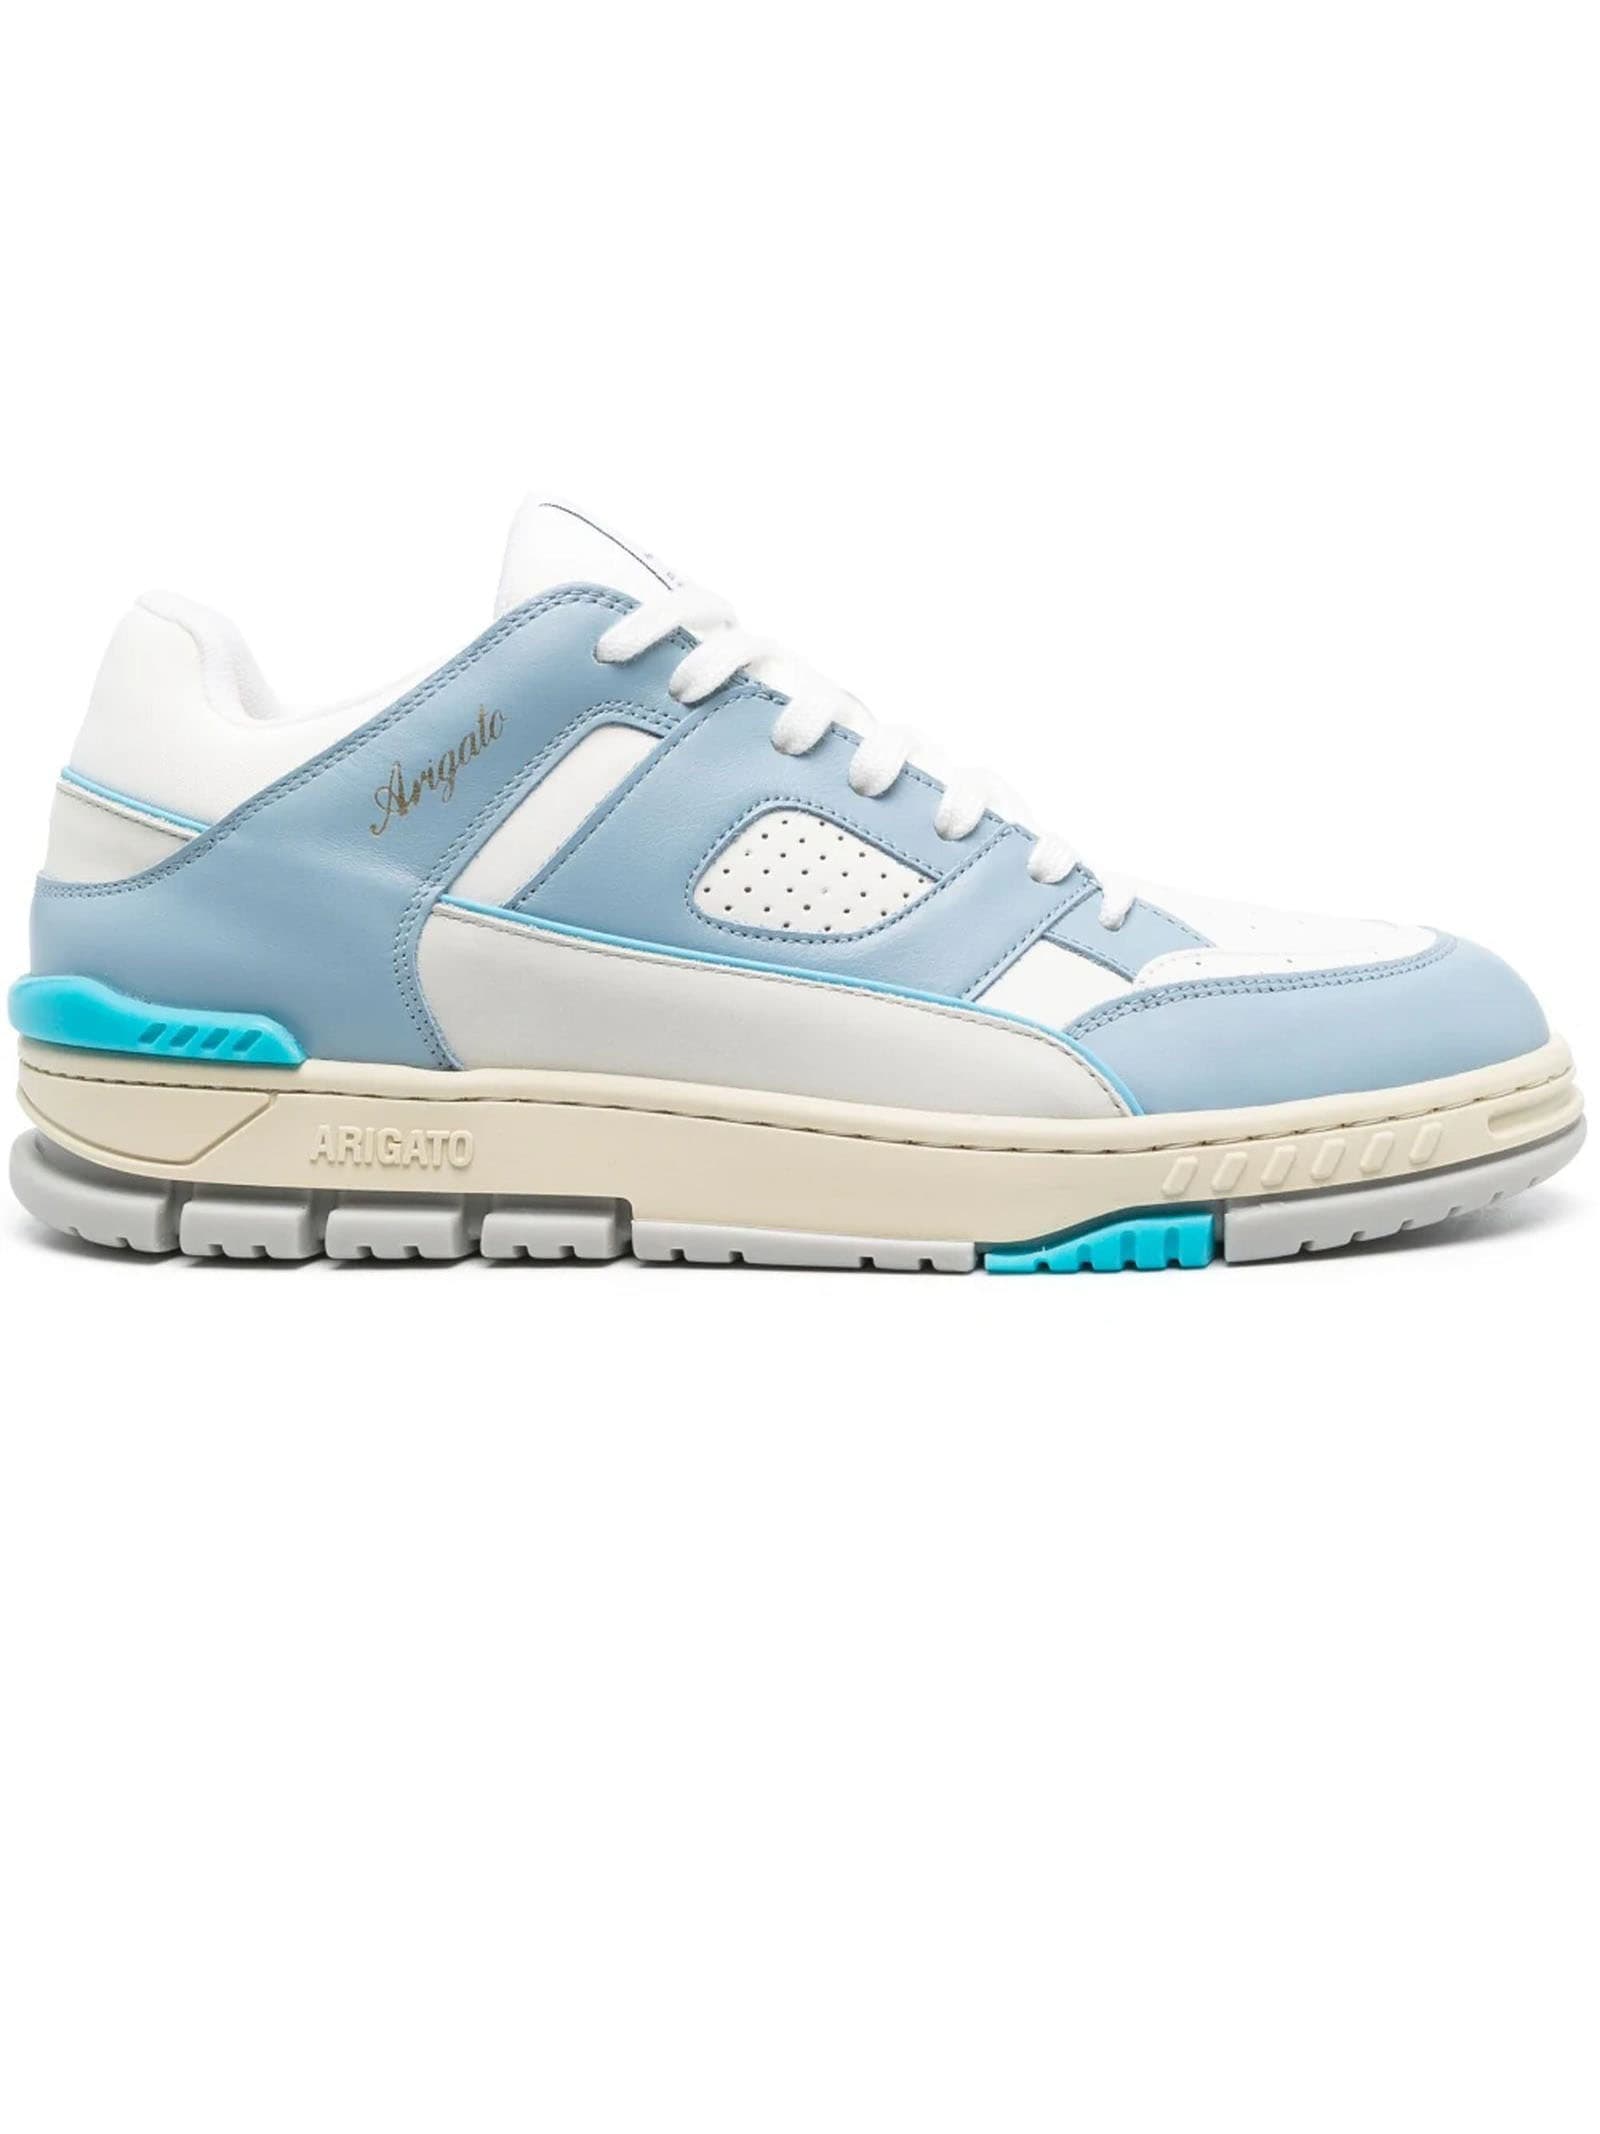 AXEL ARIGATO LIGHT BLUE AND WHITE AREA LO LEATHER SNEAKERS